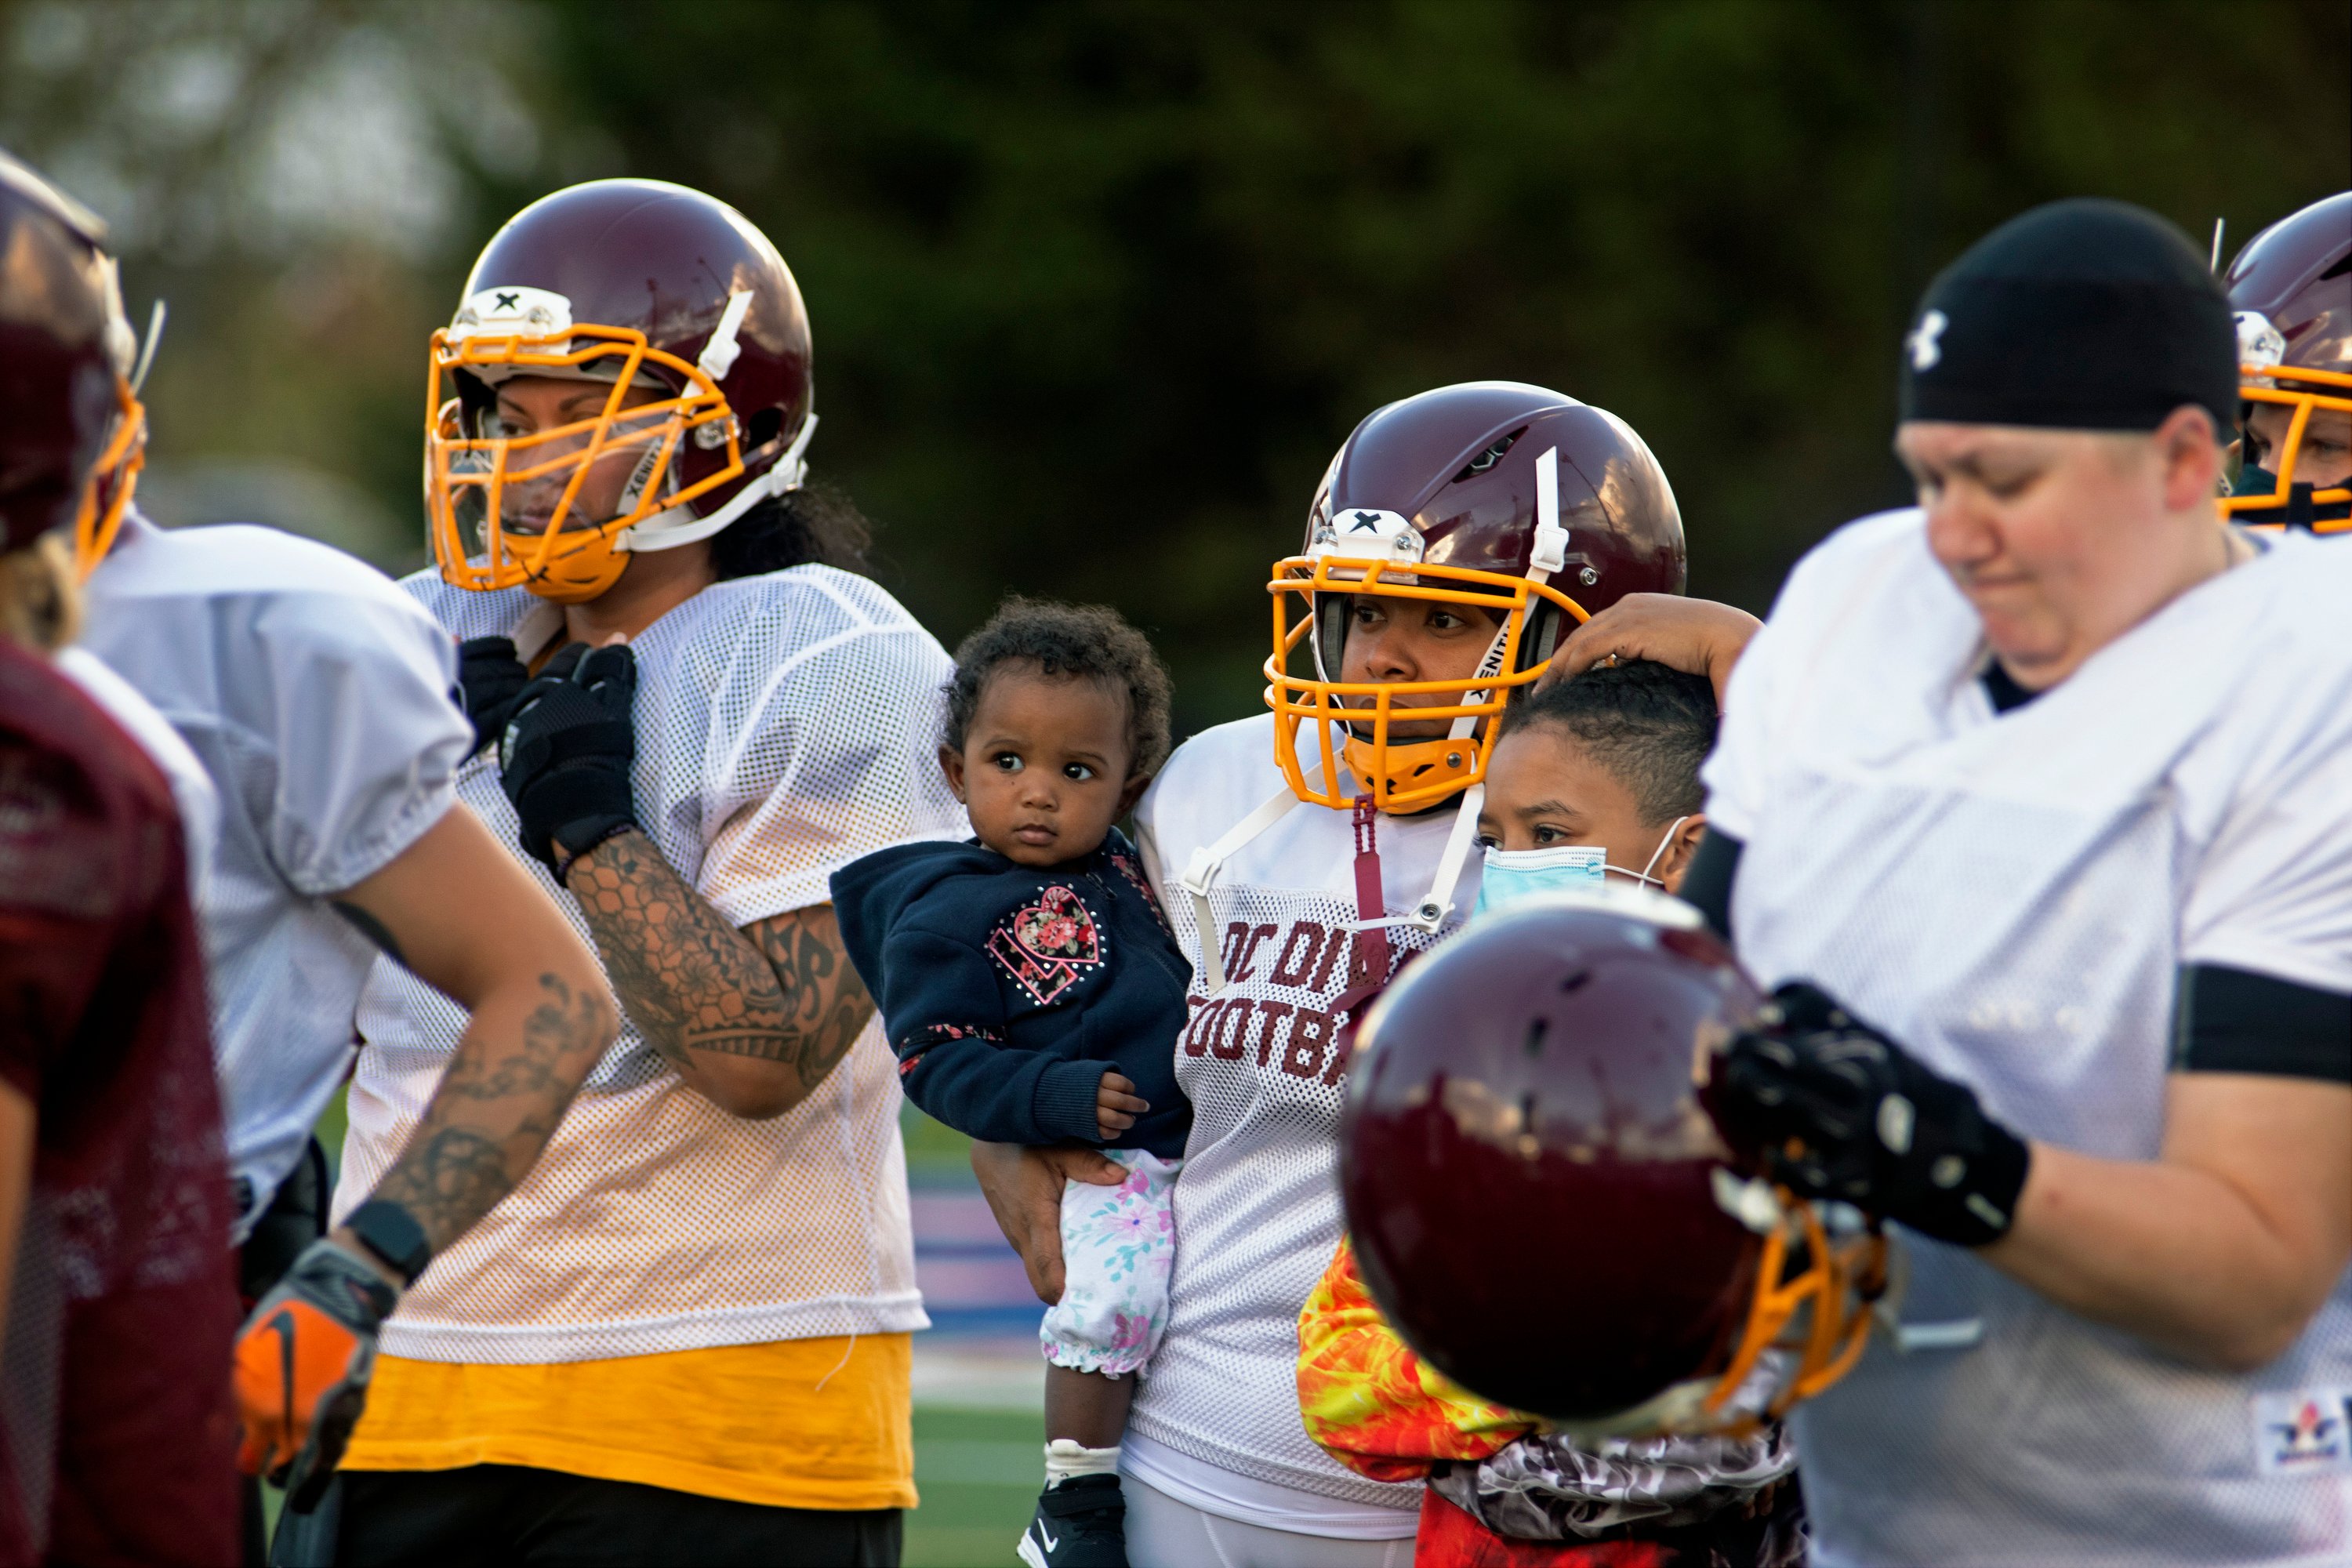 D.C. Diva football player Christina Burton stands on the sidelines with her daughter and son